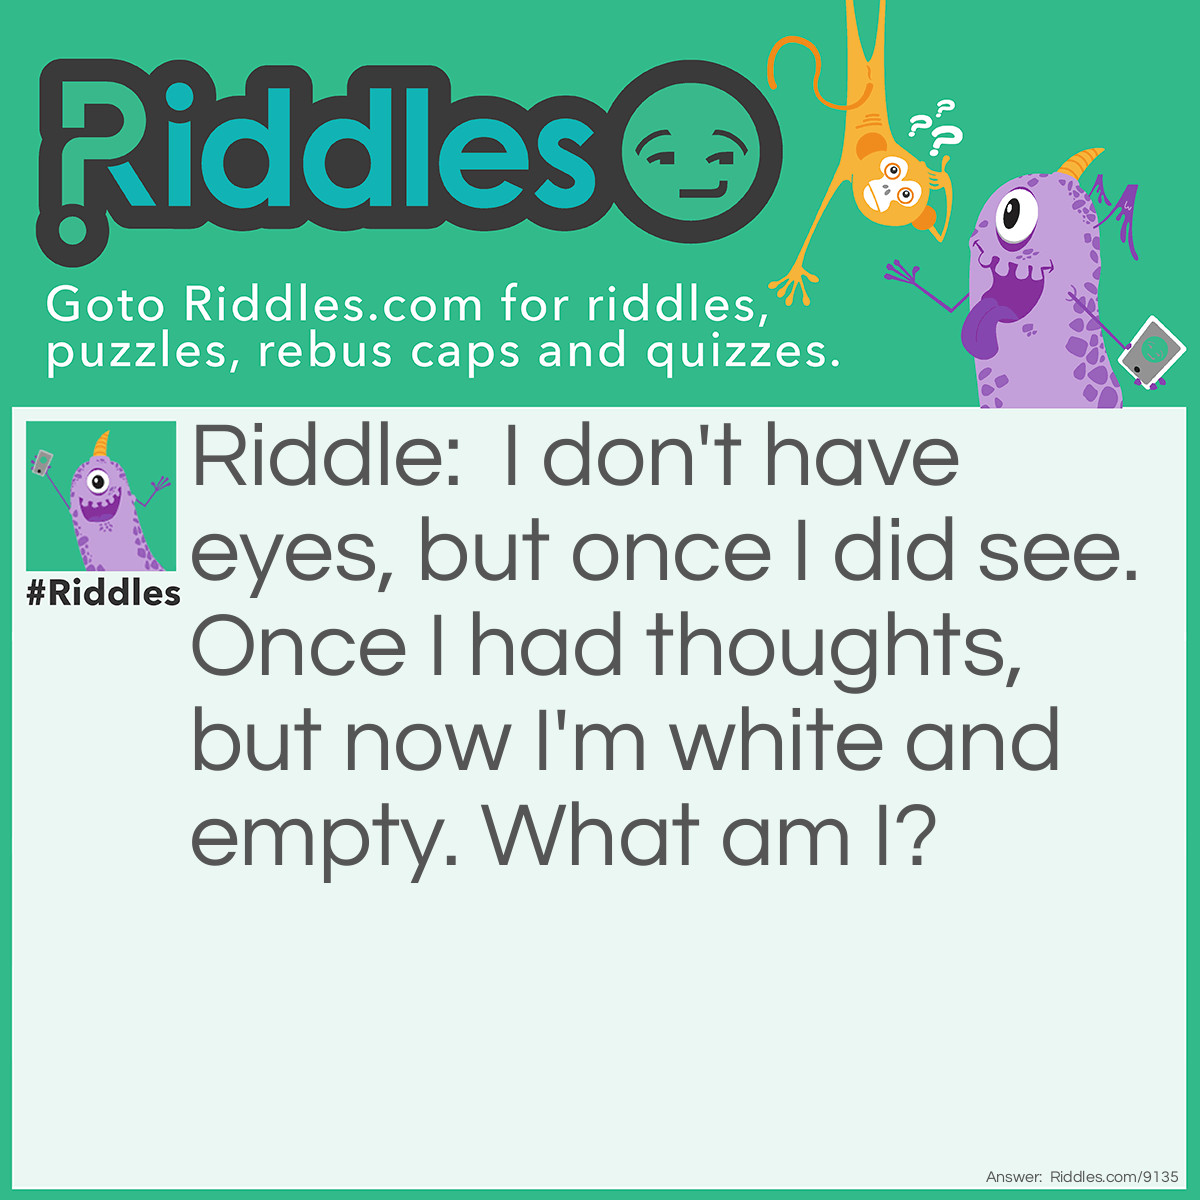 Riddle: I don't have eyes, but once I did see. Once I had thoughts, but now I'm white and empty. What am I? Answer: I am a skull.